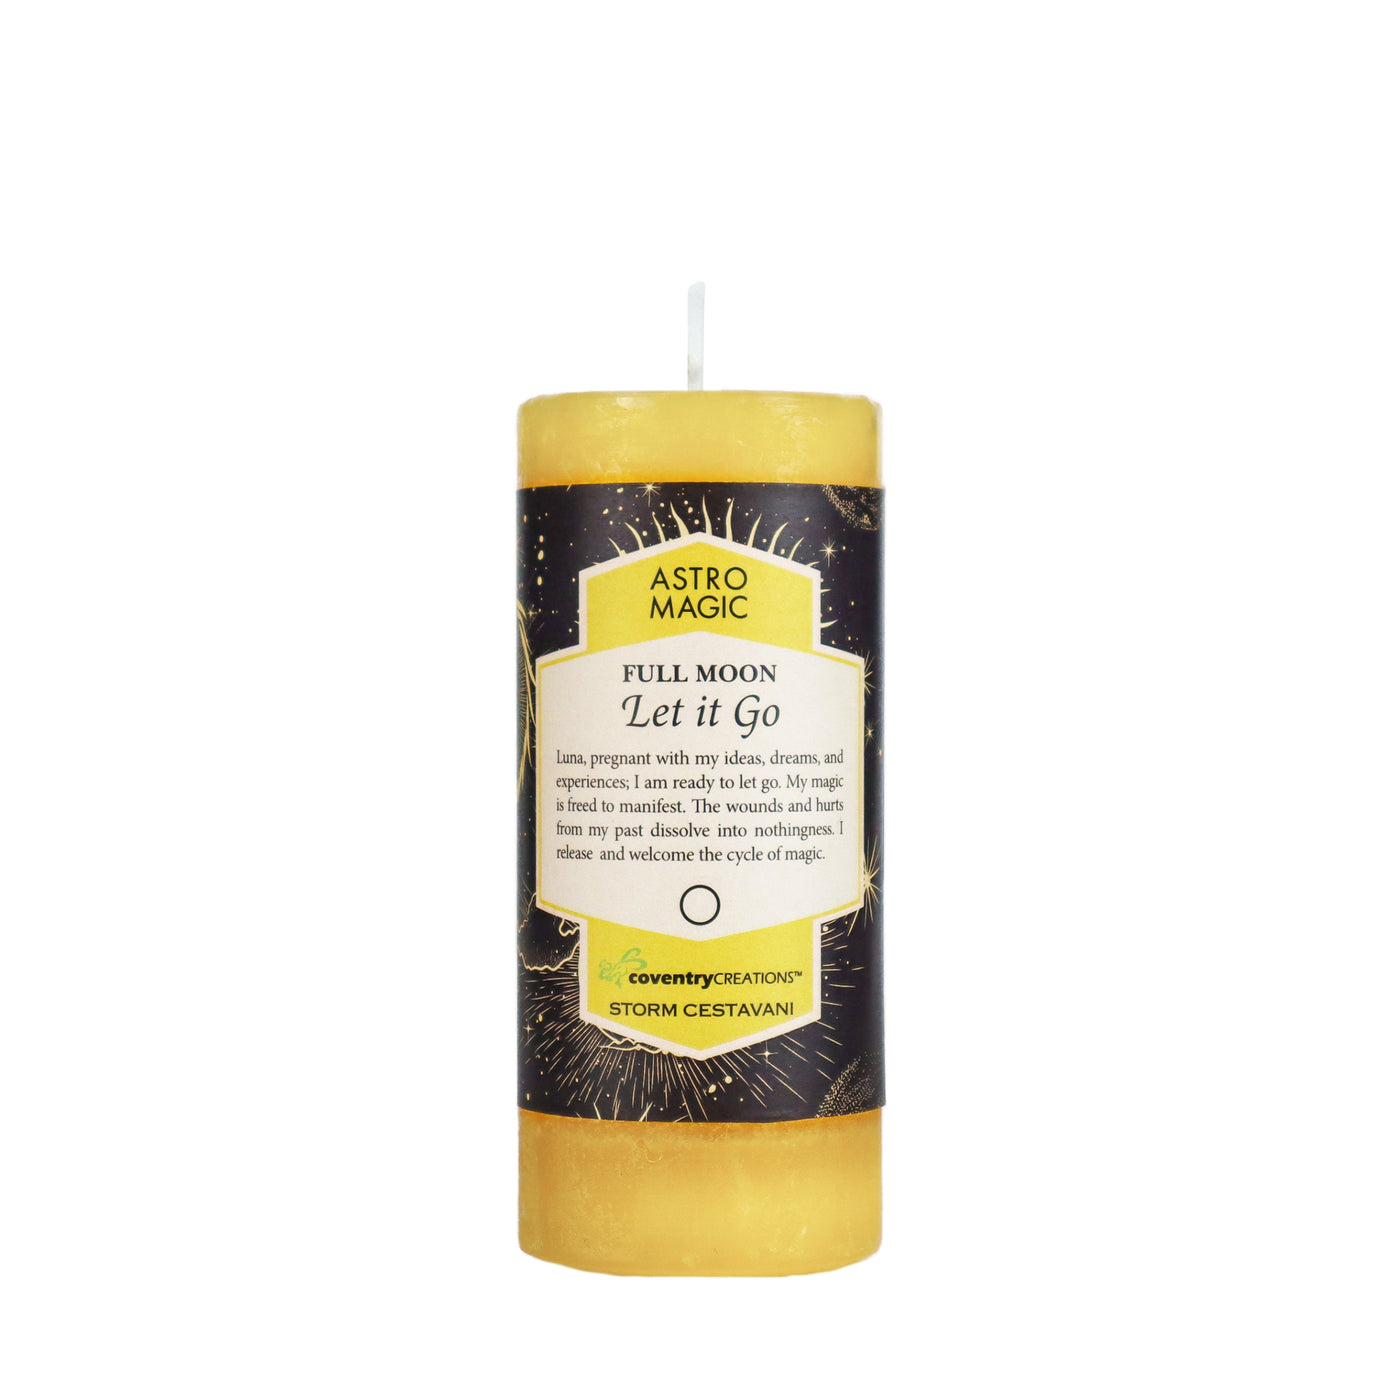 Coventry Creations Astro Magic Full Moon-Let It Go Cream candle 